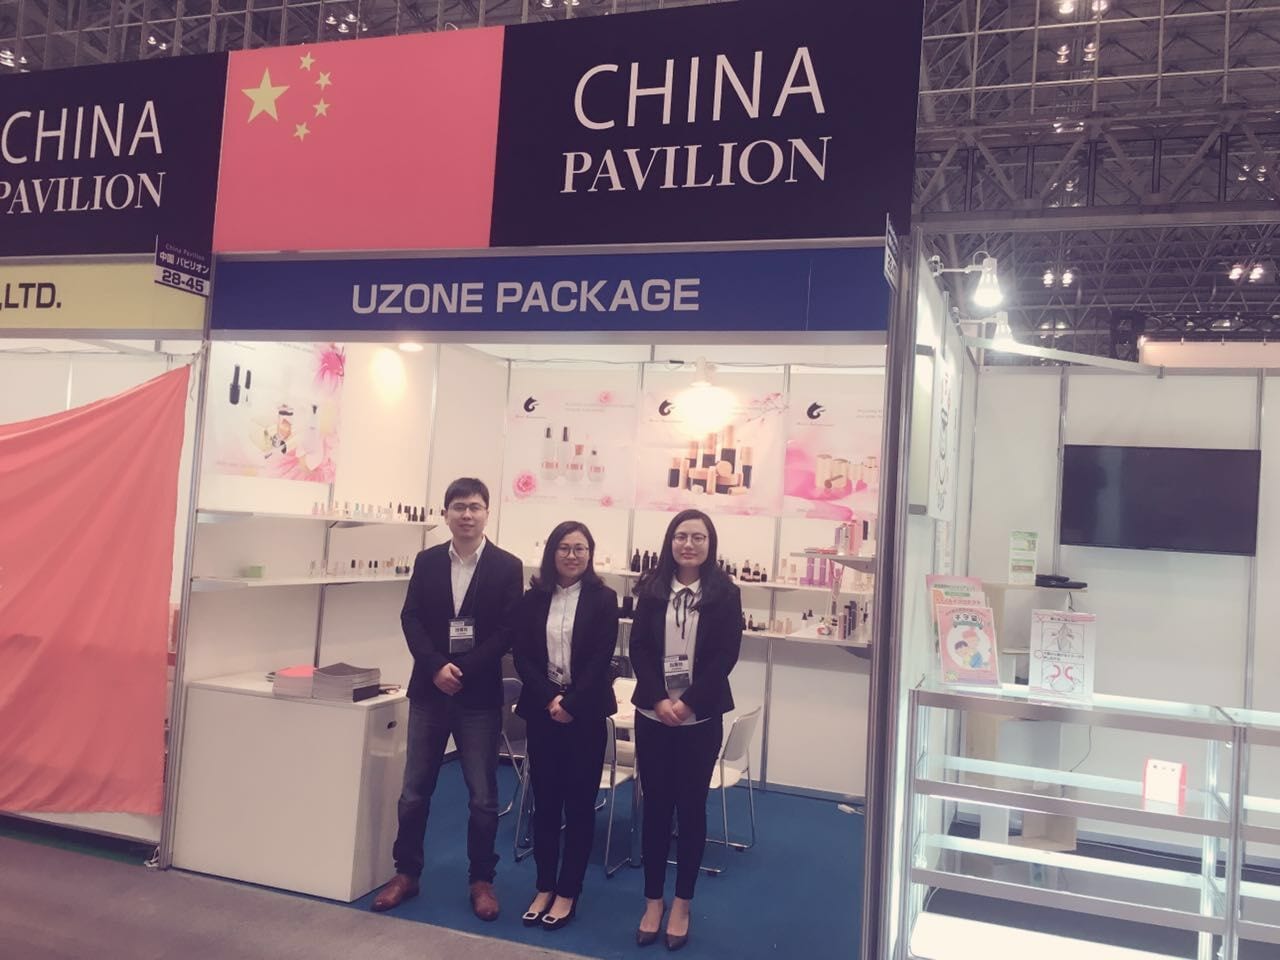 Uzone Package at Trade Show in Japan, Jan 2018